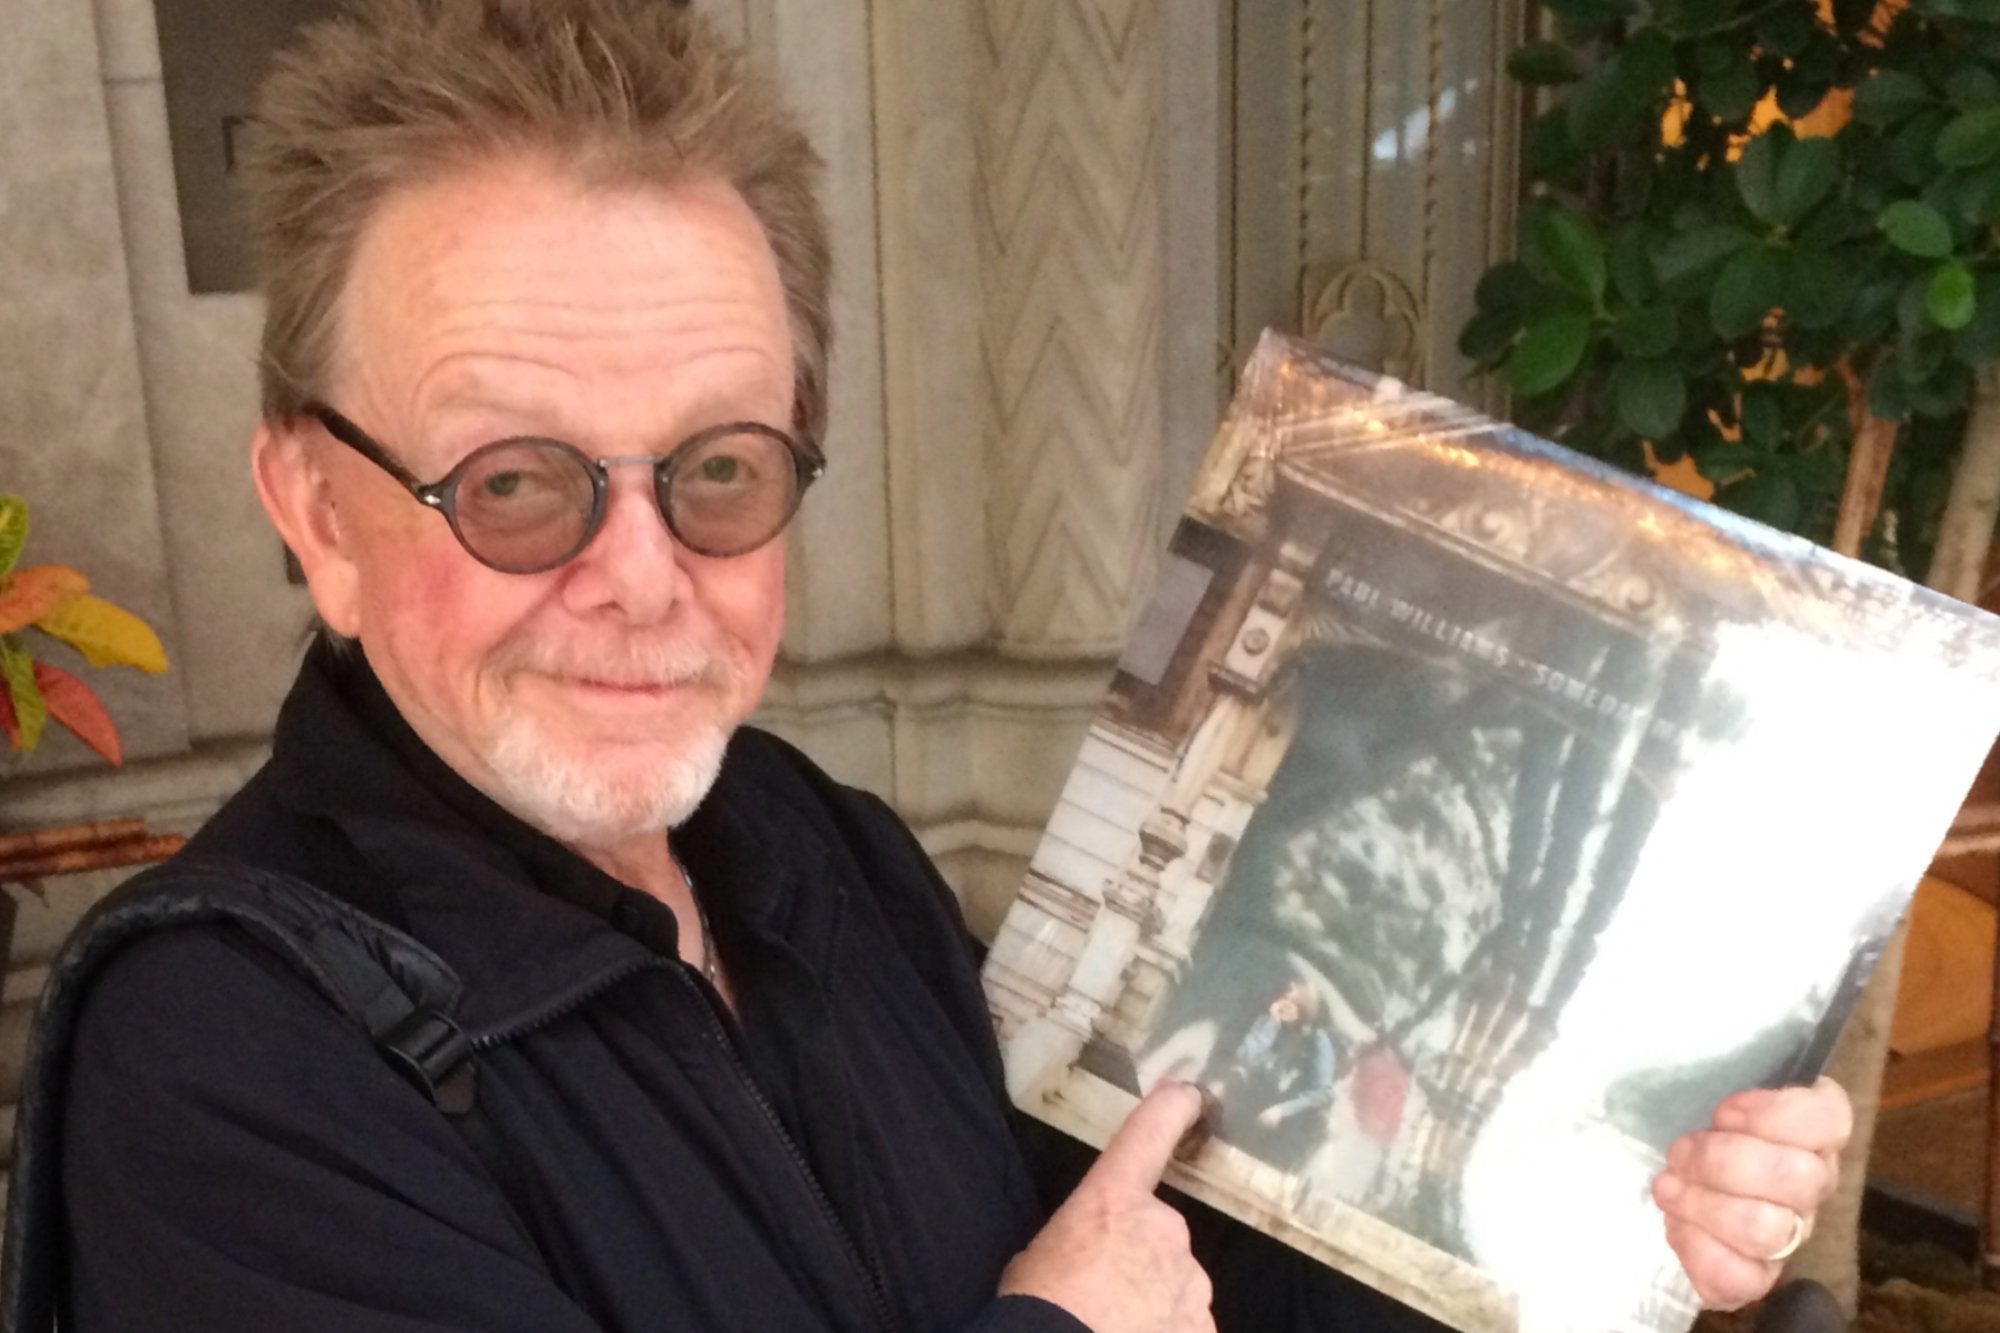 Paul Williams "thrilled" by Ship to Shore PhonoCo's 'Someday Man' Reissue!